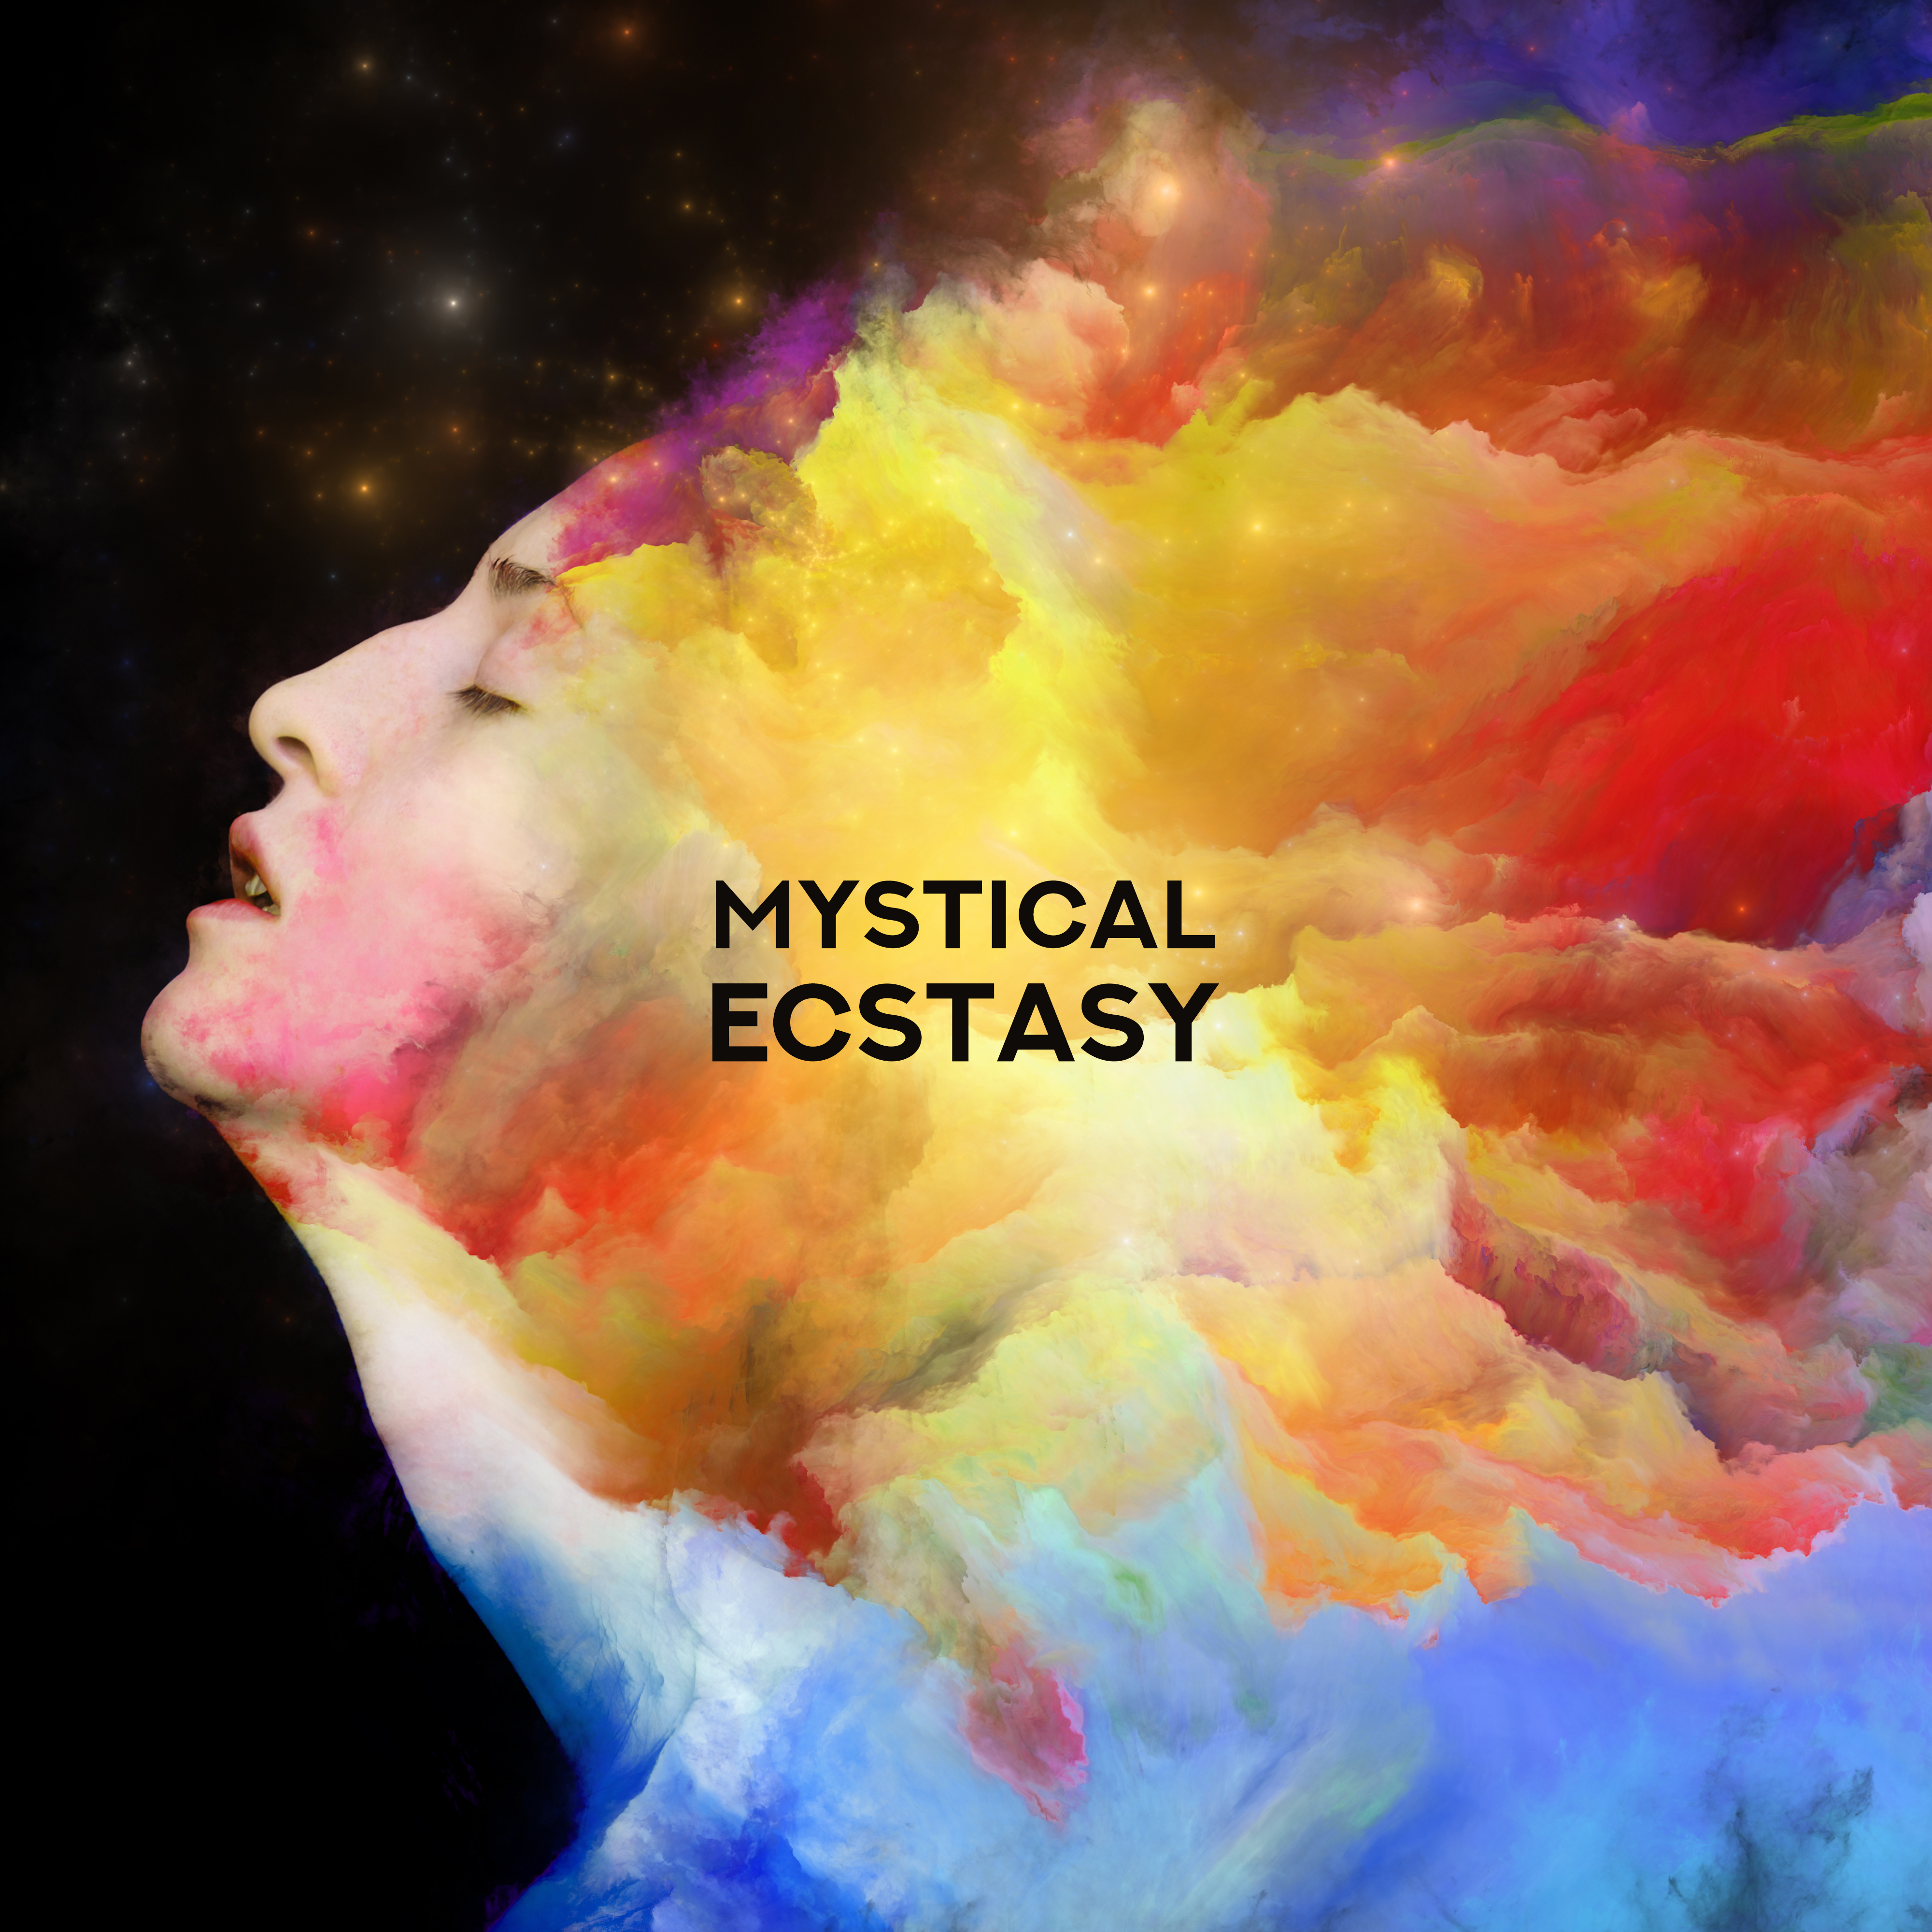 Mystical Ecstasy: Best Music for Meditation and Contemplation, Gaining Spiritual and Mental Experience and a Higher State of Consciousness